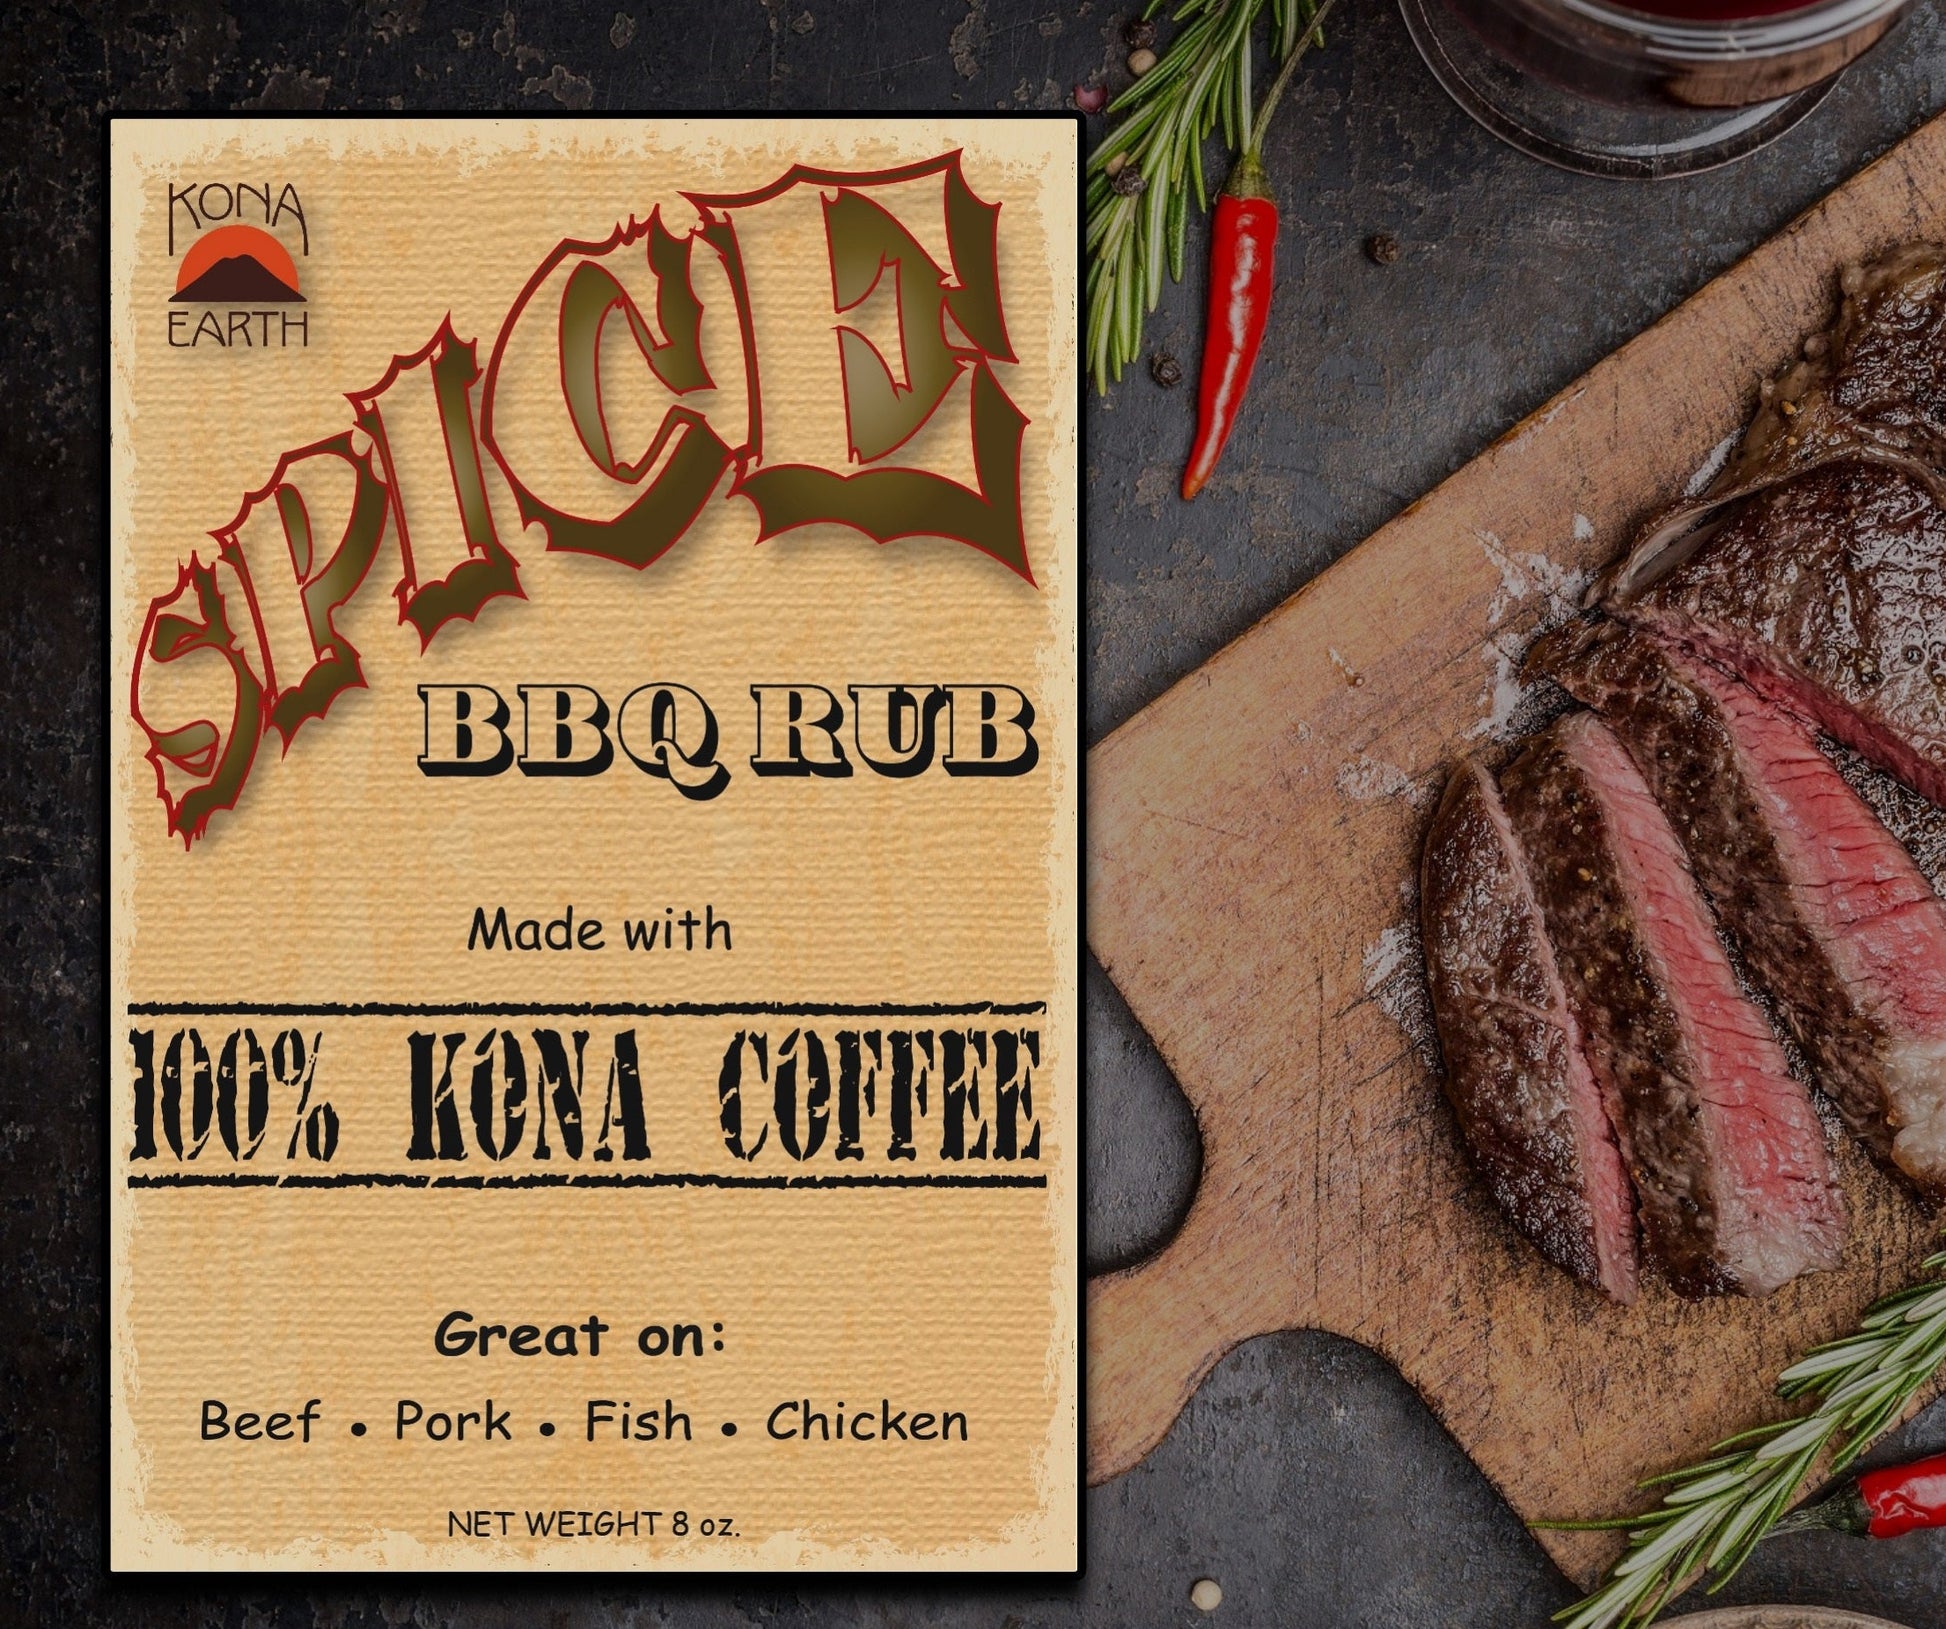 Kona Earth Spice label over picture of grilled meat